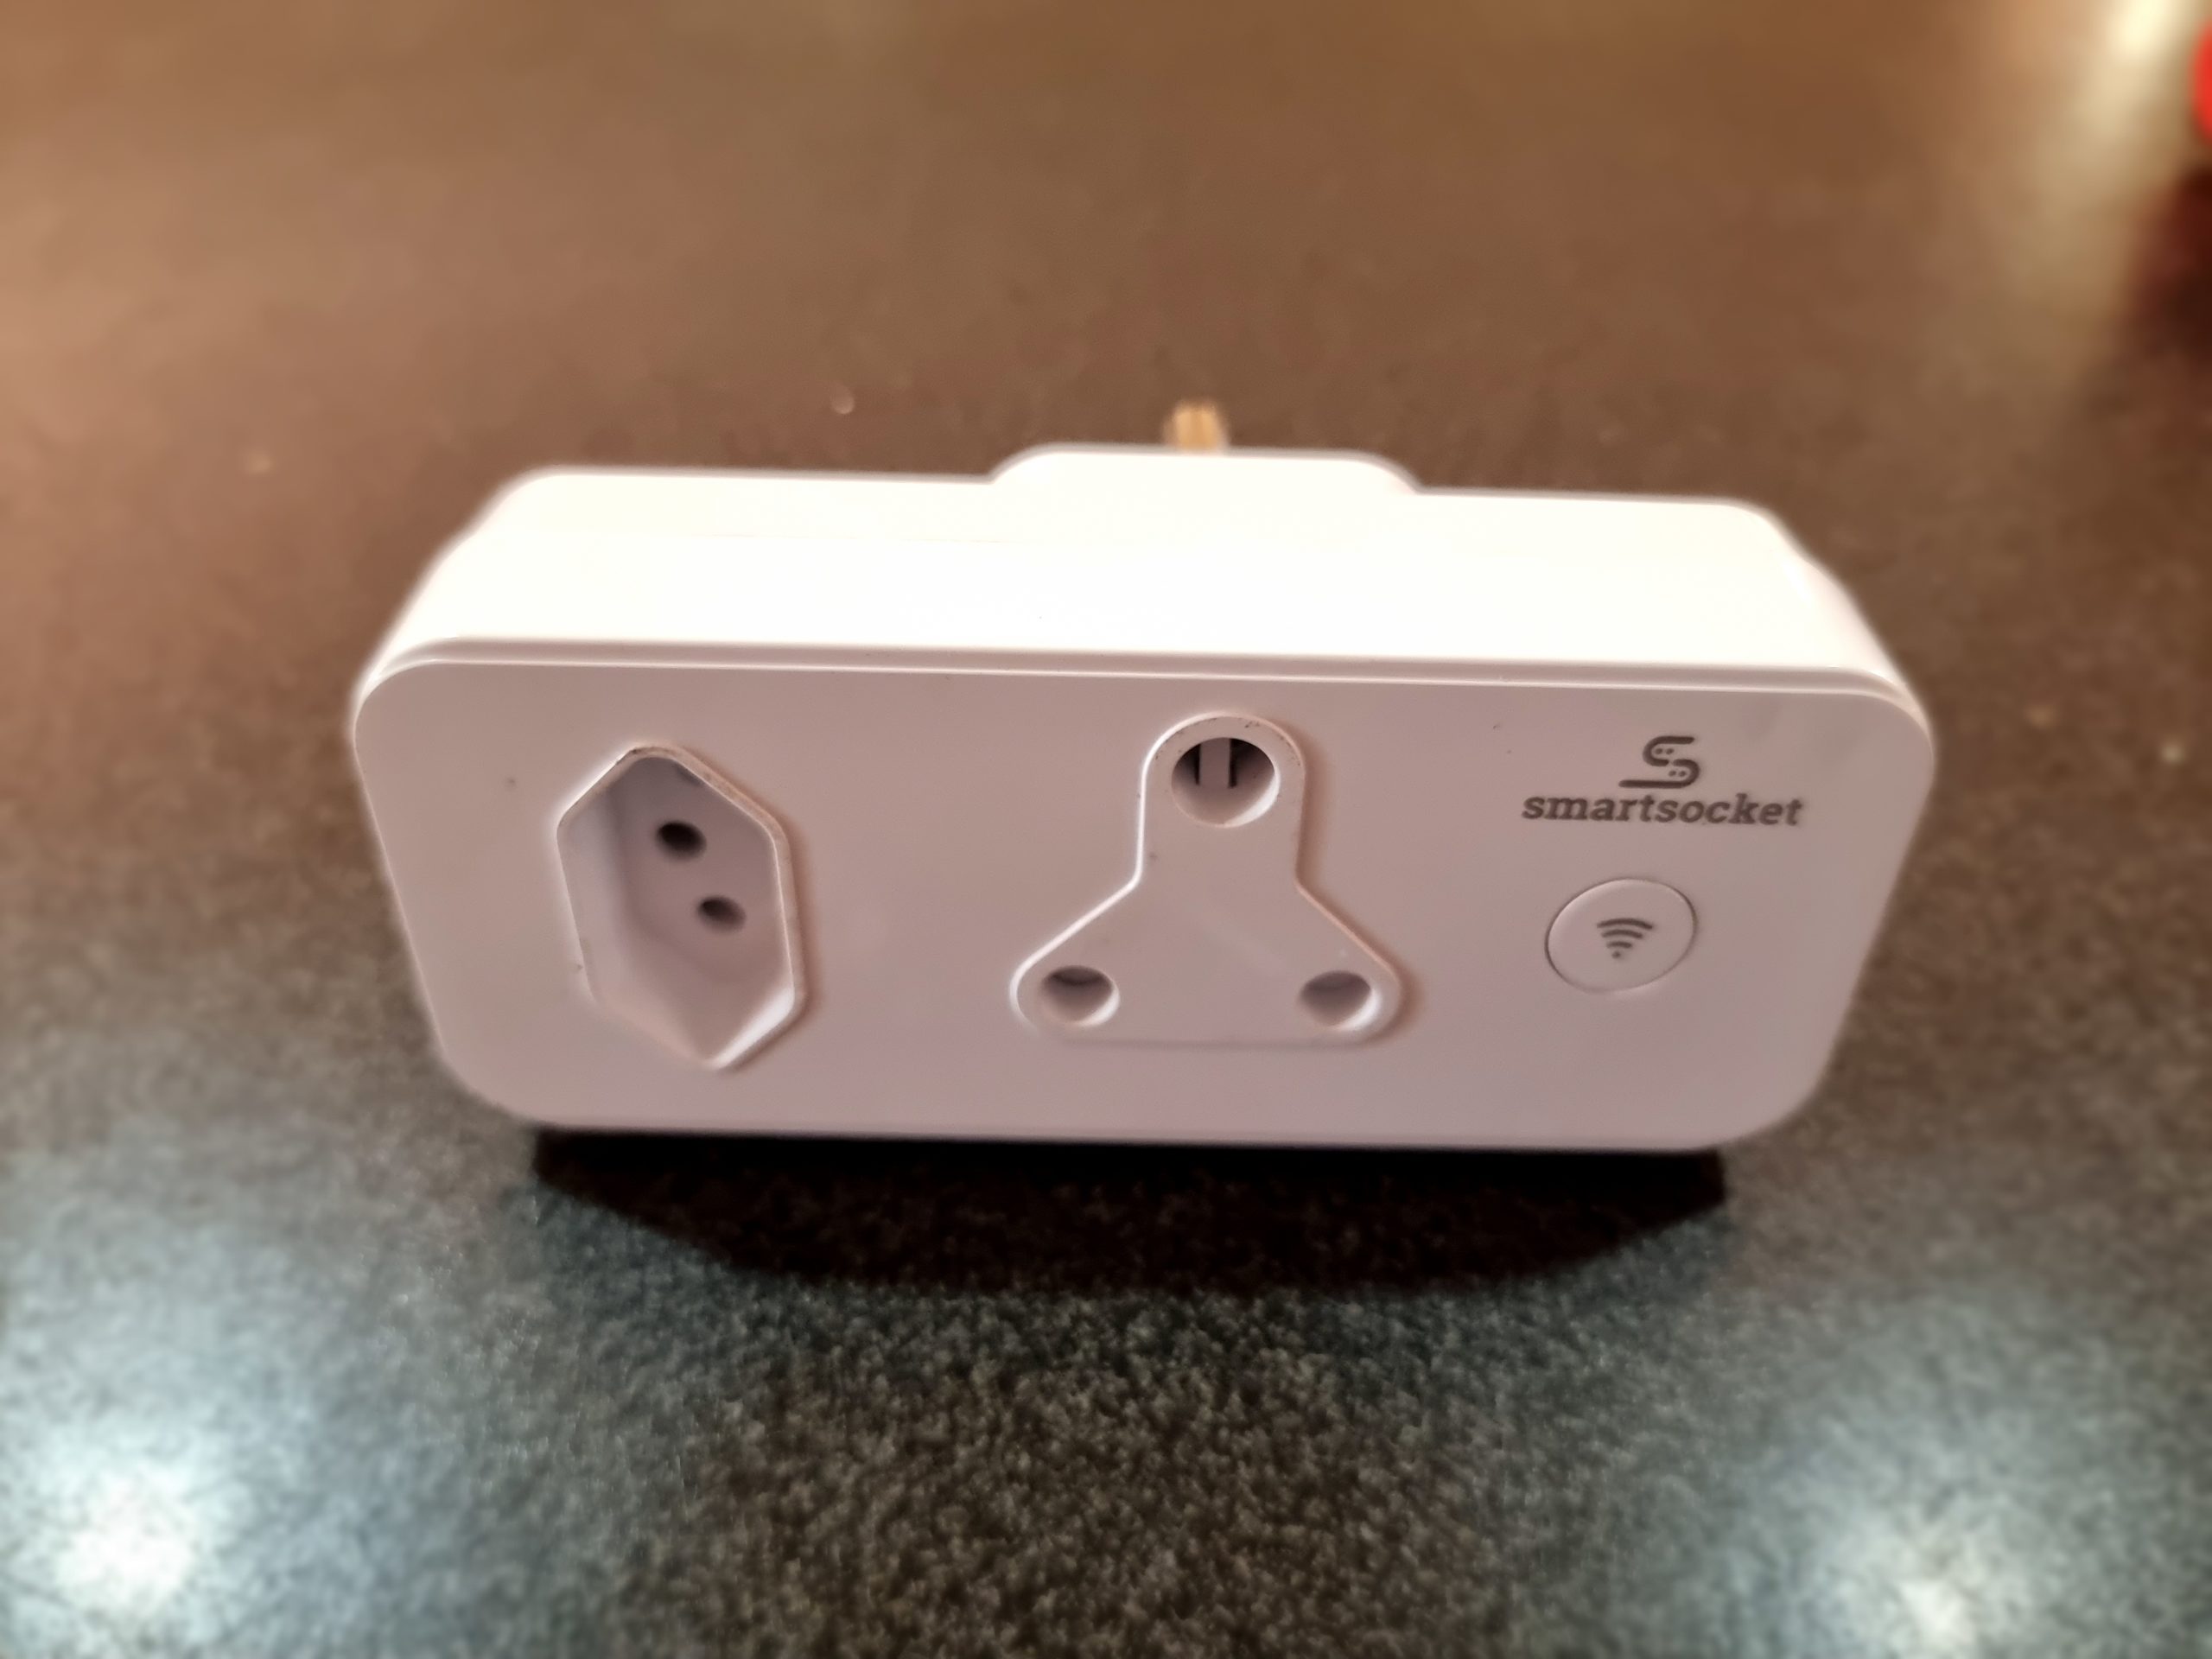 WIFI SMART EURO ADAPT & SOCKET 16A (2) – New, no packaging (Retail R500)